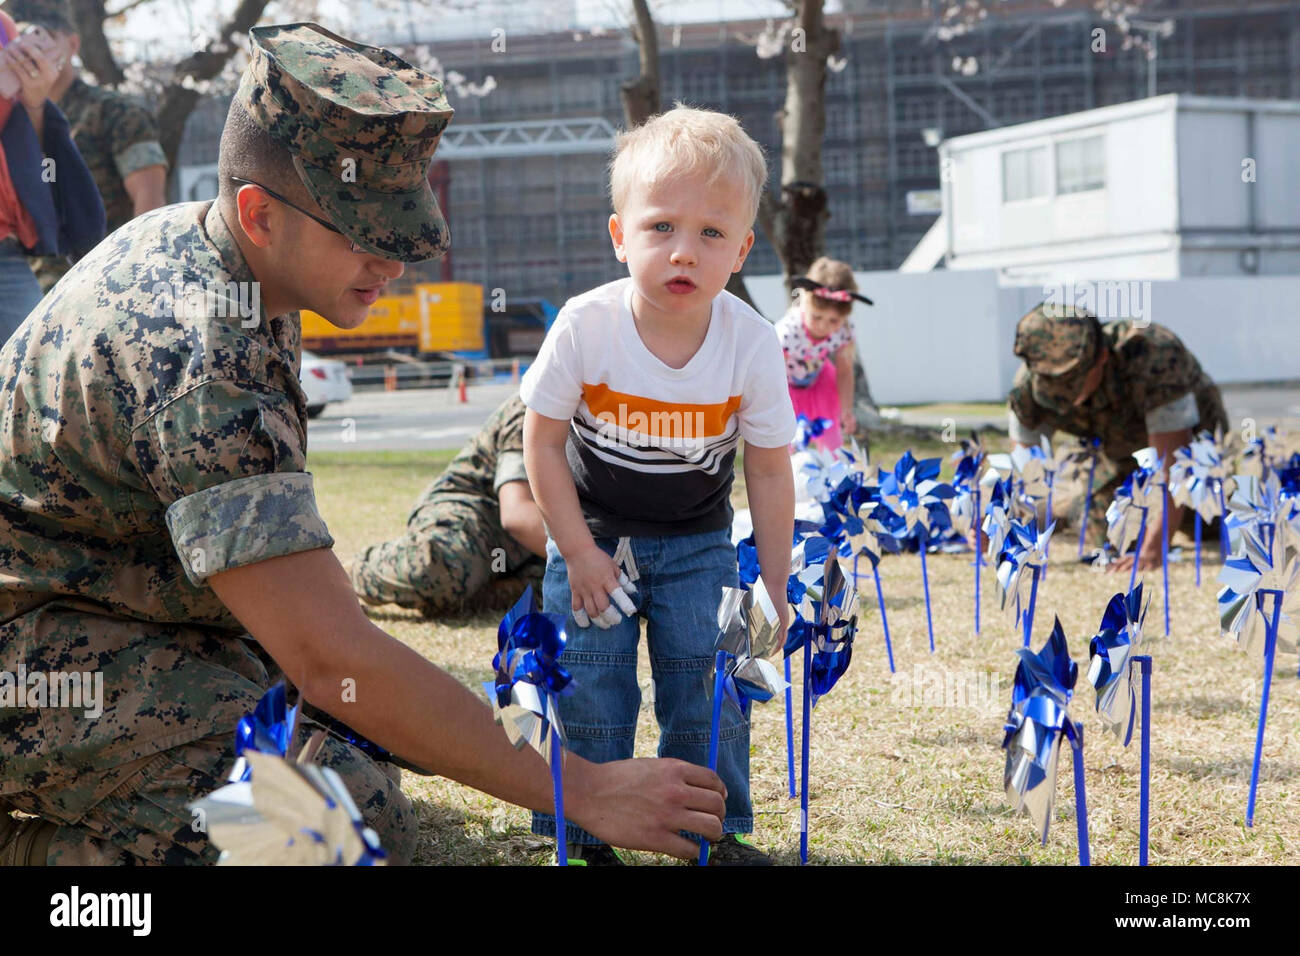 U.S. Marine Corps Lance Cpl. Andre Vianna, motor vehicle operator with Marine Wing Support Squadron (MWSS) 171, helps Jake Katzenberger, Marine Corps Air Station (MCAS) Iwakuni resident, plant blue pinwheels during the 2018 National Child Abuse Prevention Pinwheel Planting at MCAS Iwakuni, Japan, March 29, 2018. The blue pinwheels were planted as a part of the National Child Abuse Prevention Month activities and provide the opportunity for individuals and organizations to take action. Stock Photo